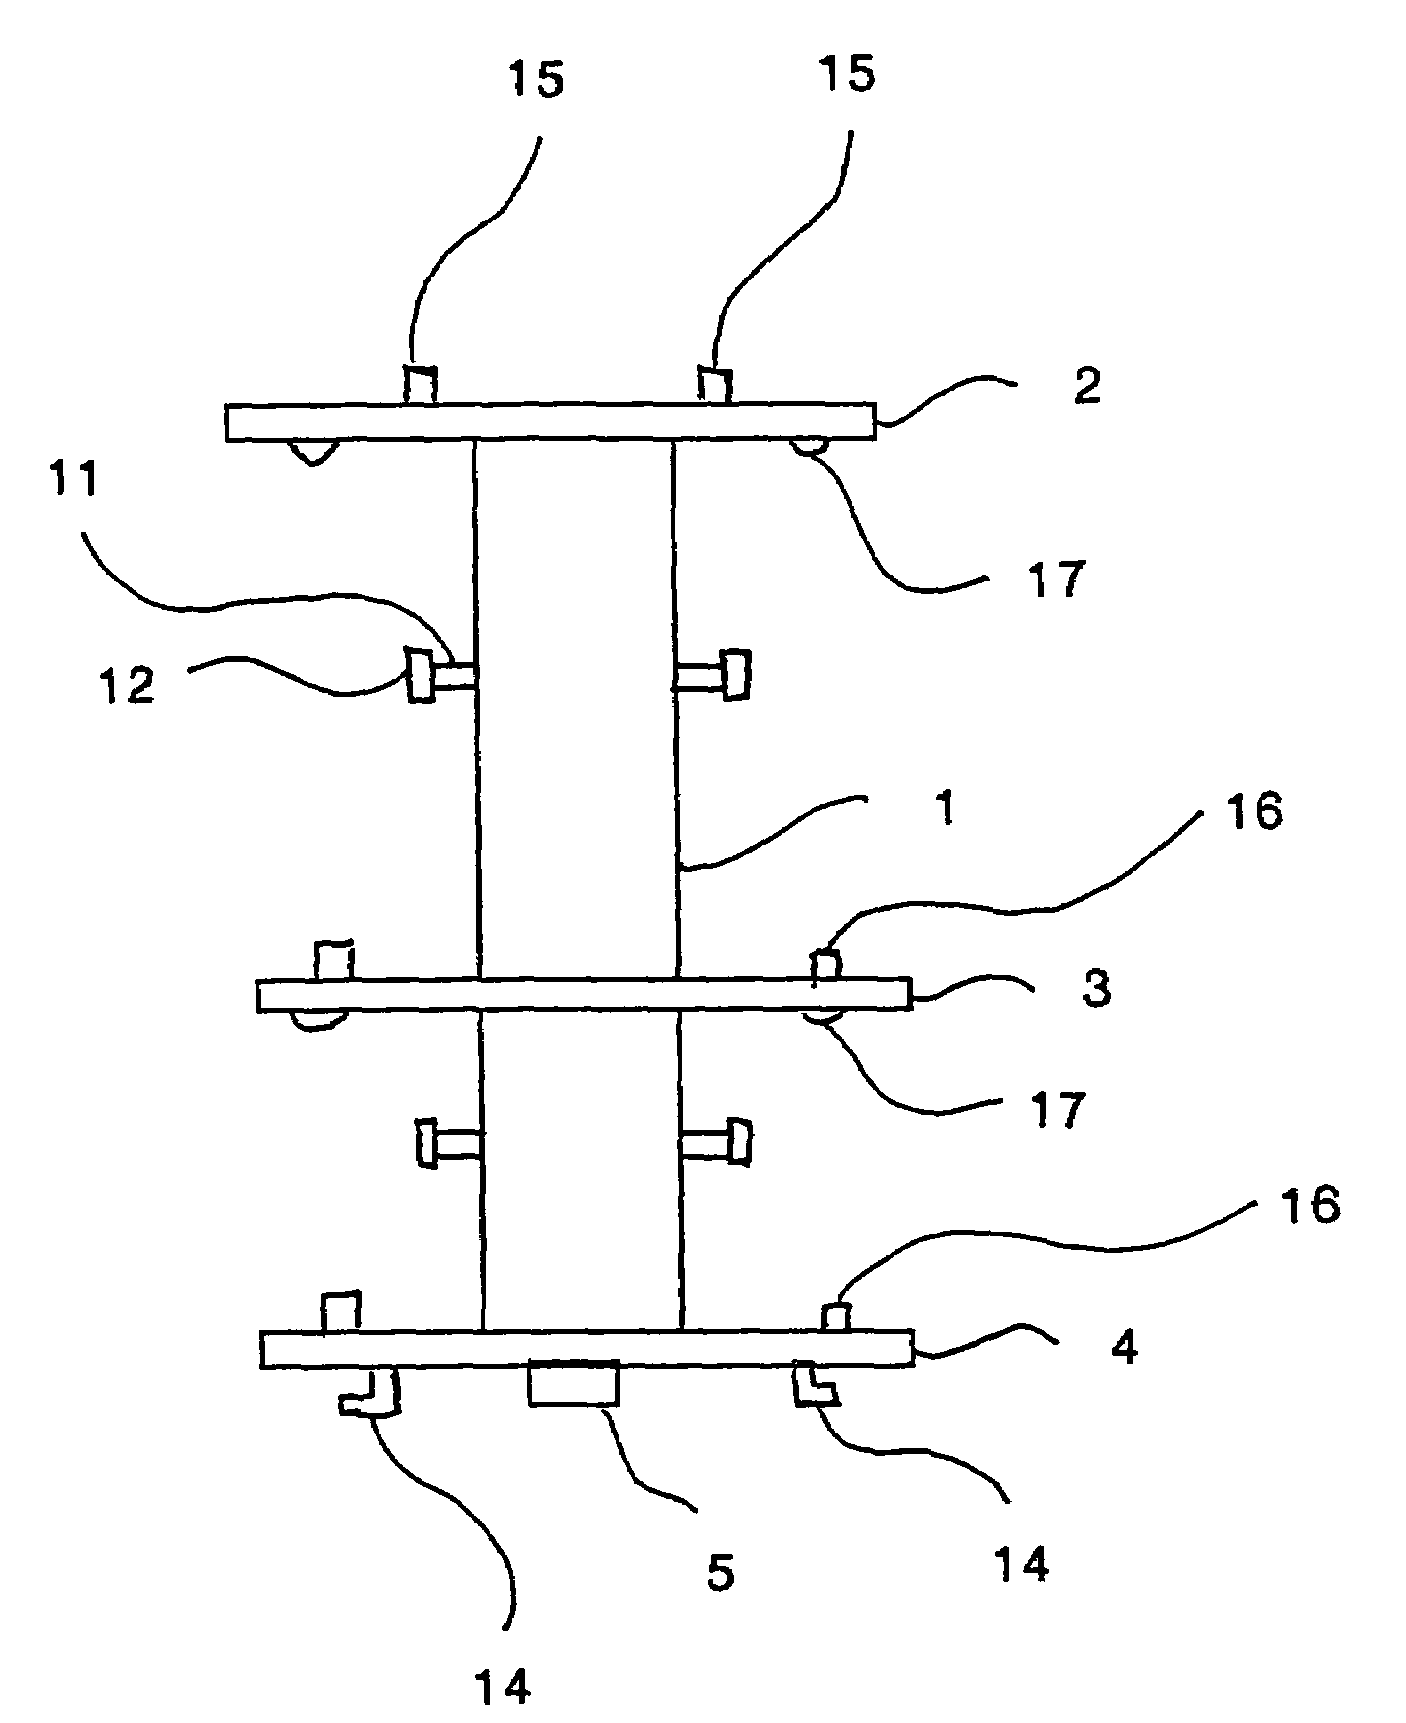 Platform and system for propellant tank storage and transfer in space